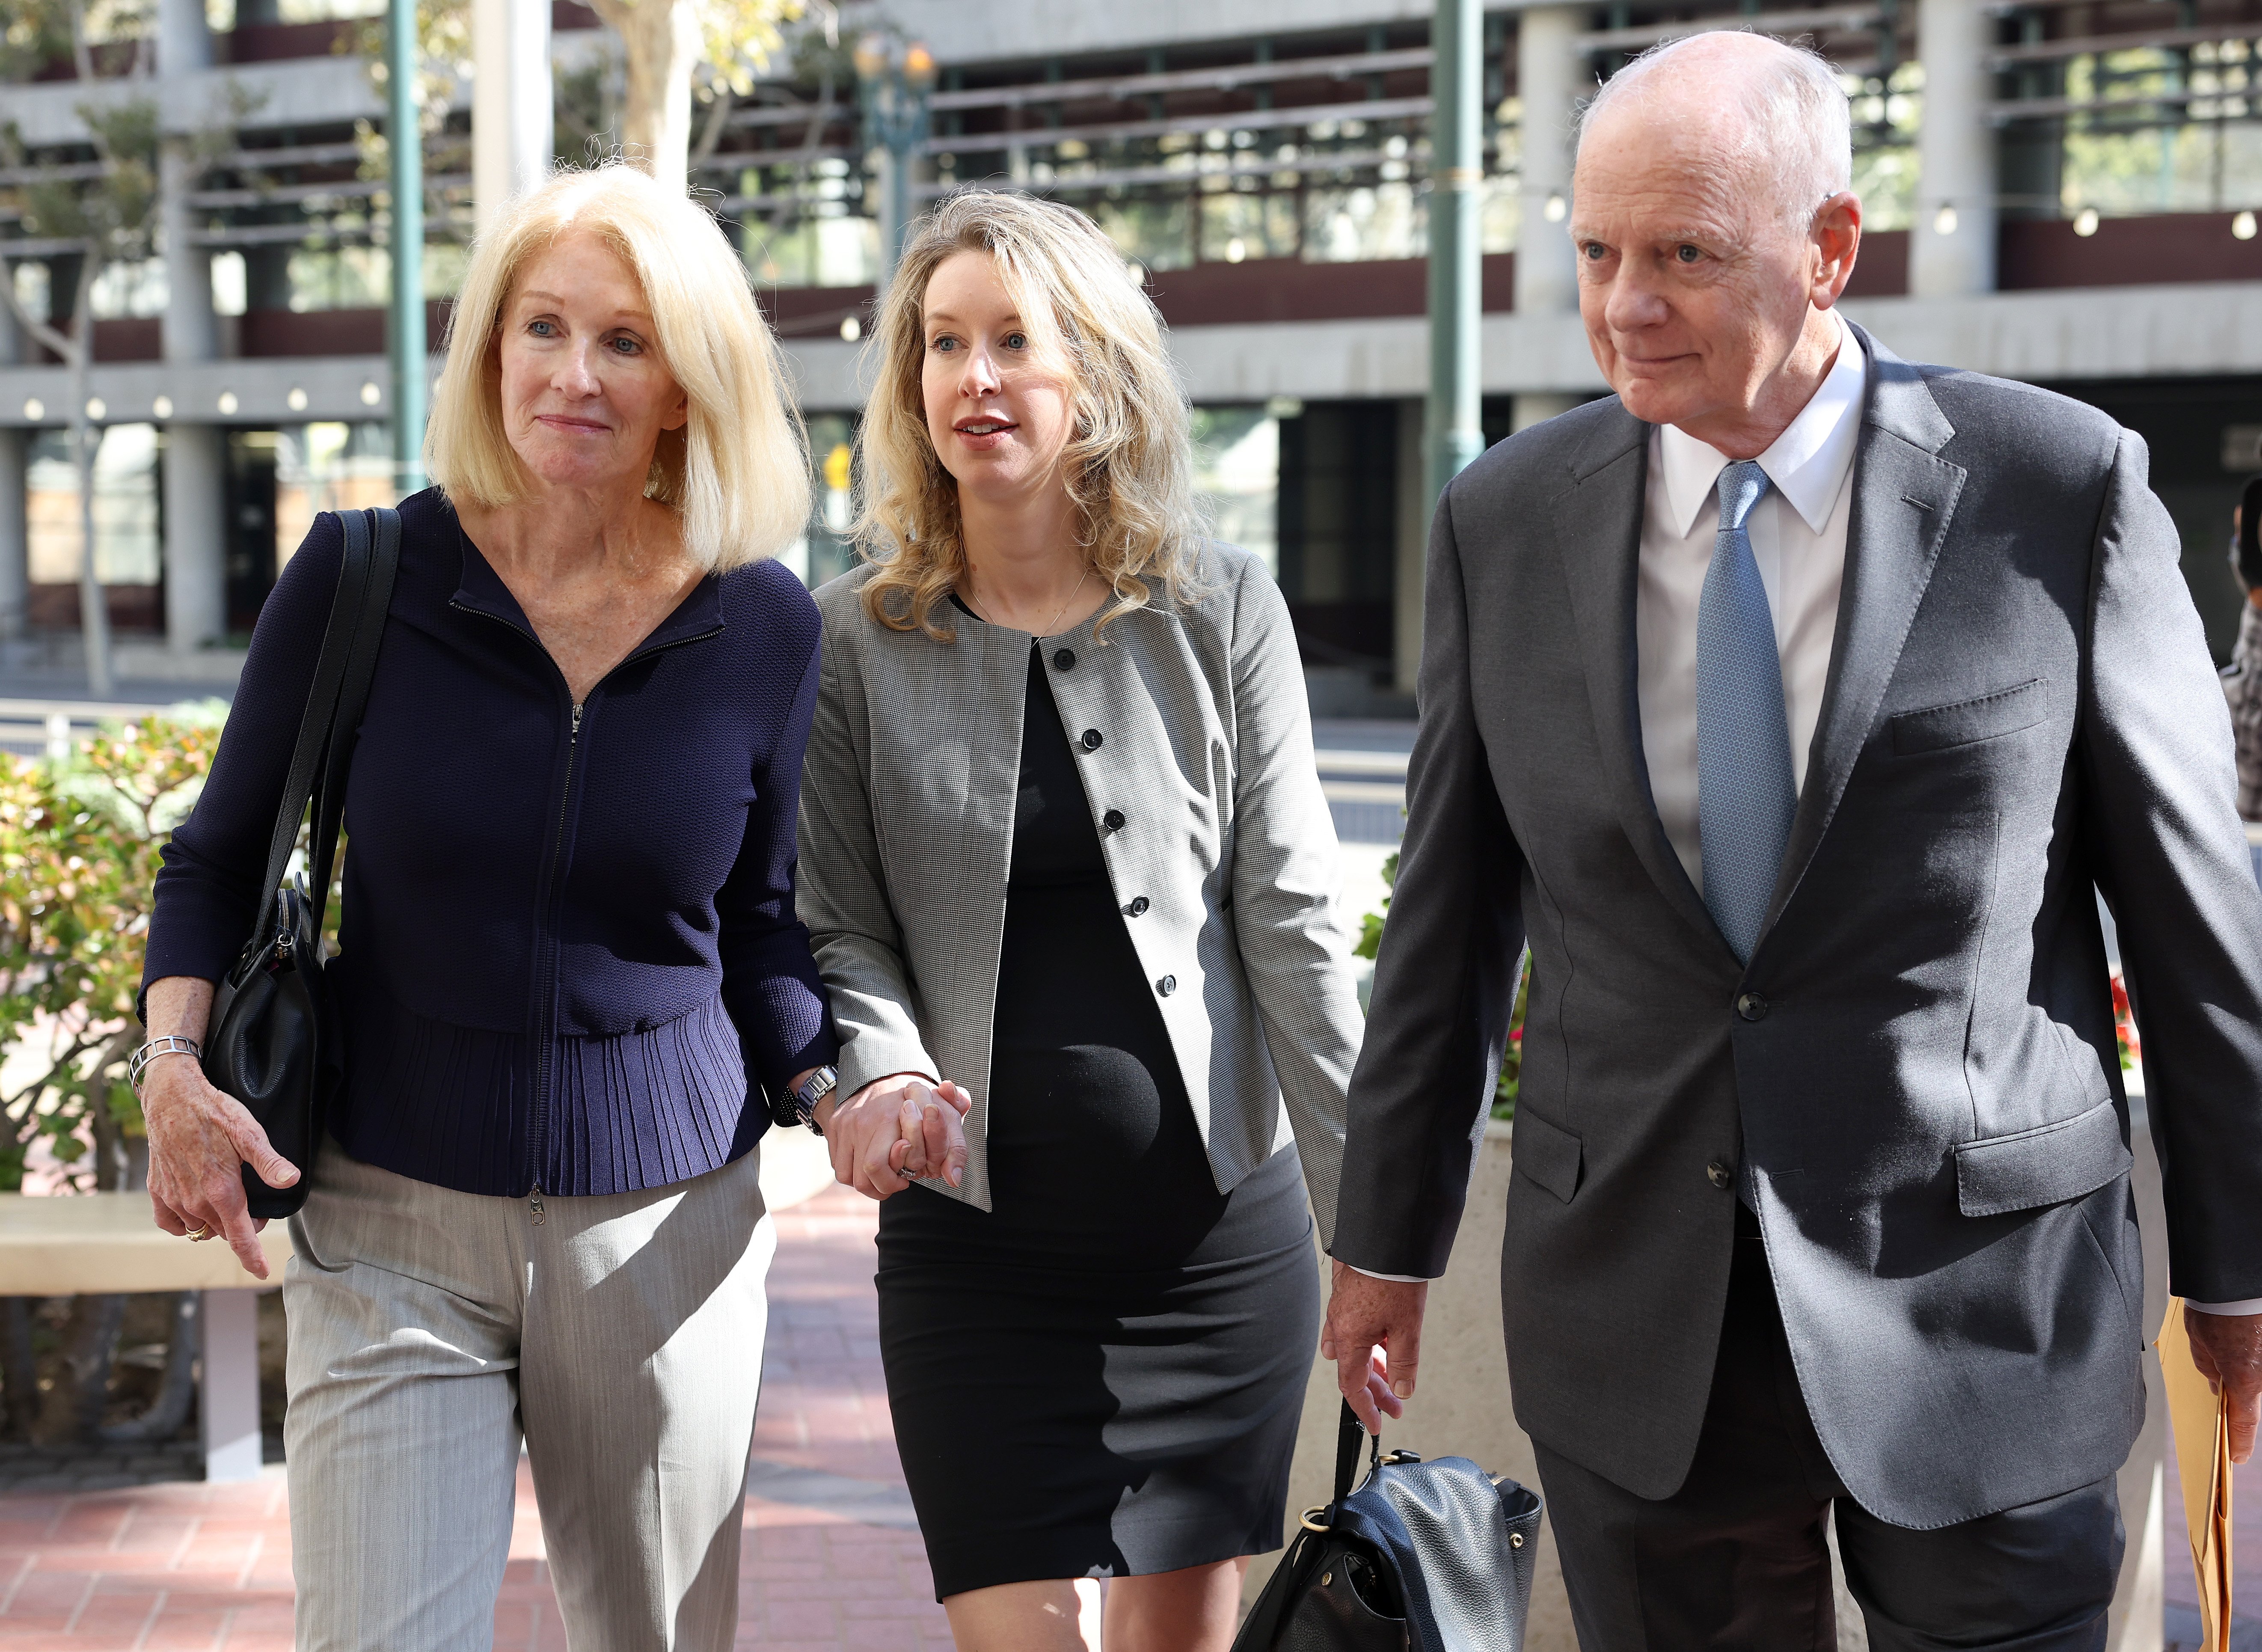  Elizabeth Holmes arrives at federal court with her mother Noel Holmes and father Christian Holmes on September 01, 2022 in San Jose, California. | Source: Getty Images